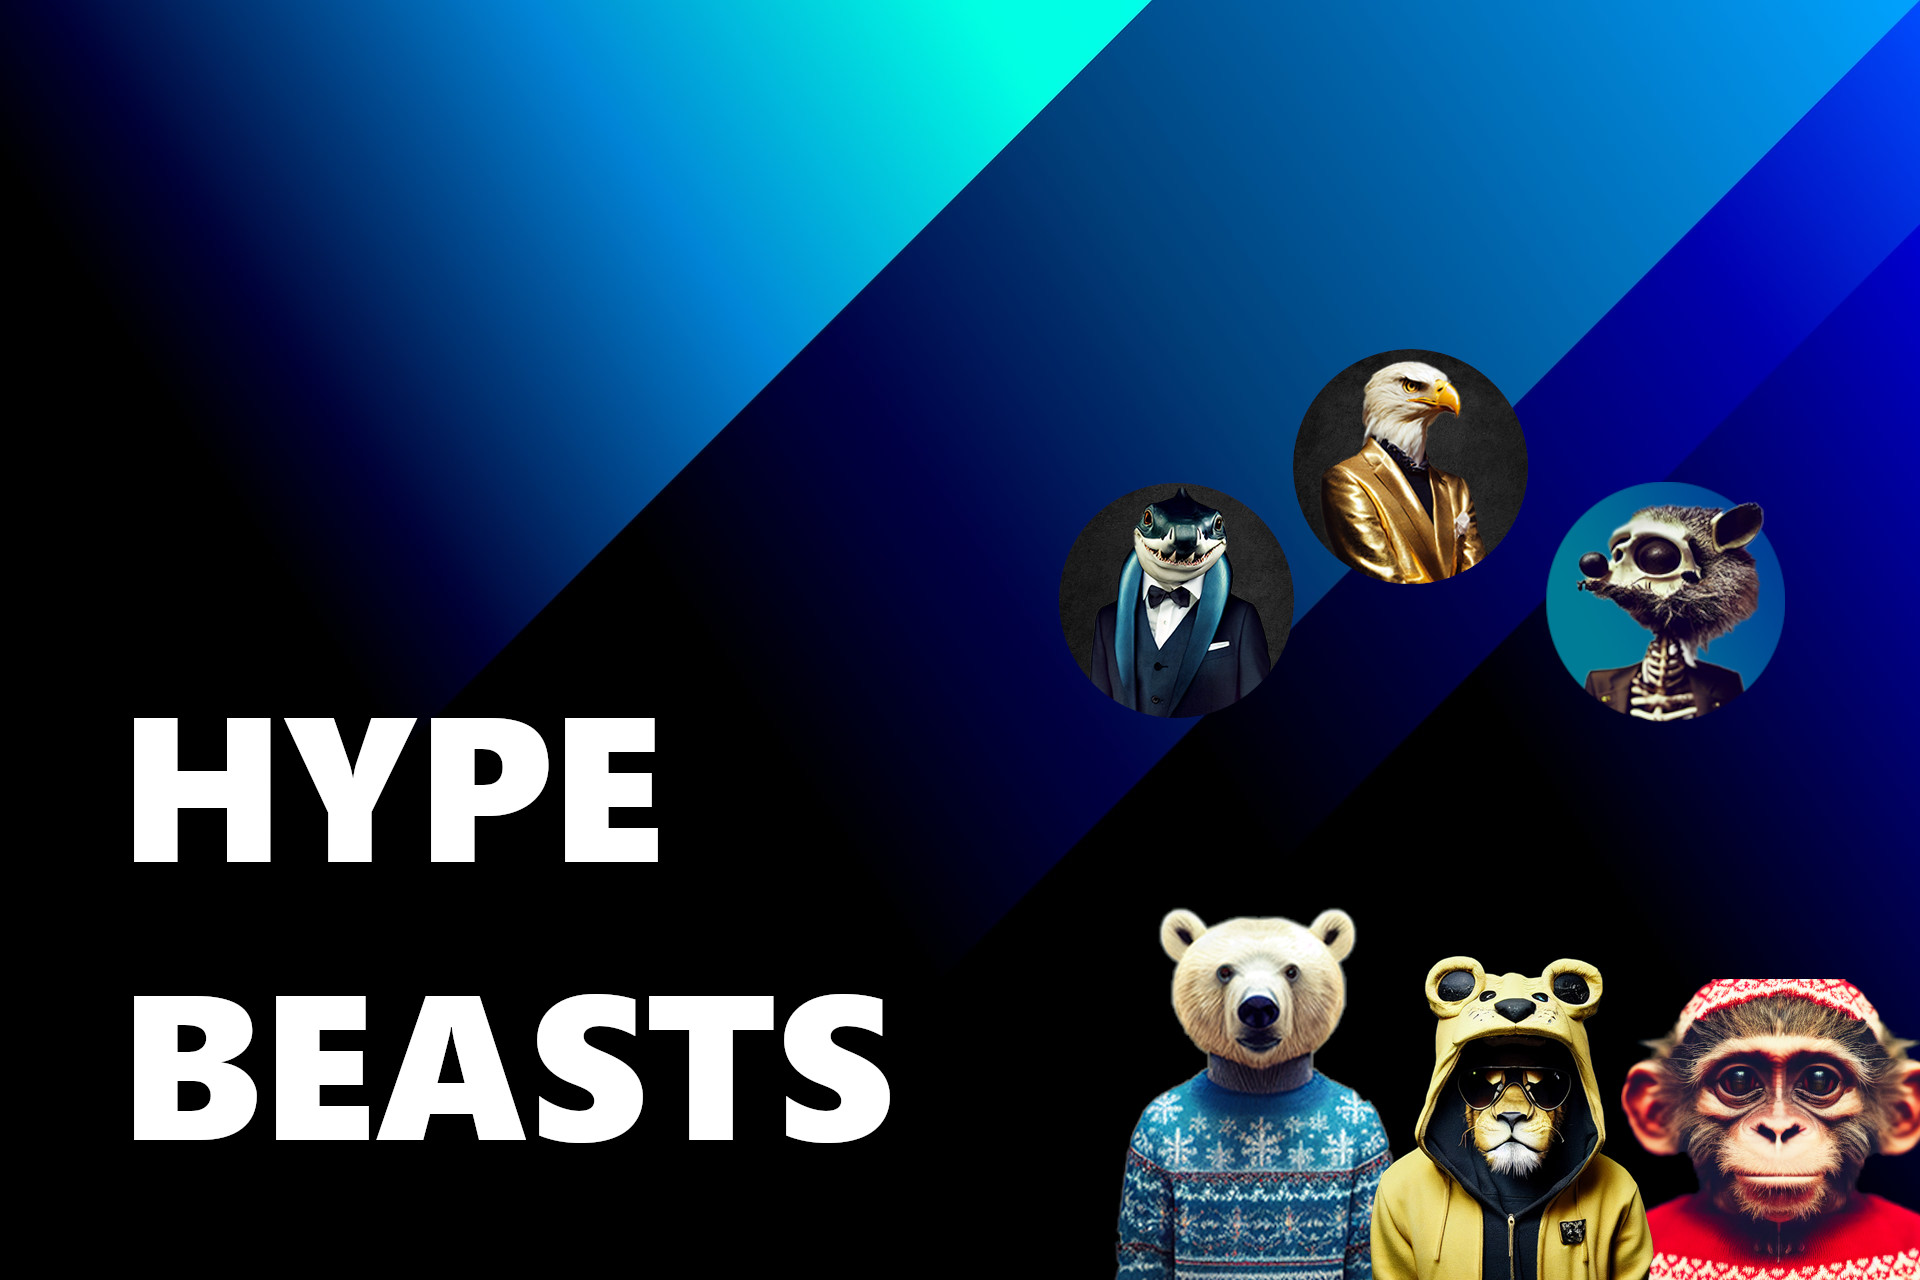 What Are Hype Beasts - featured image.